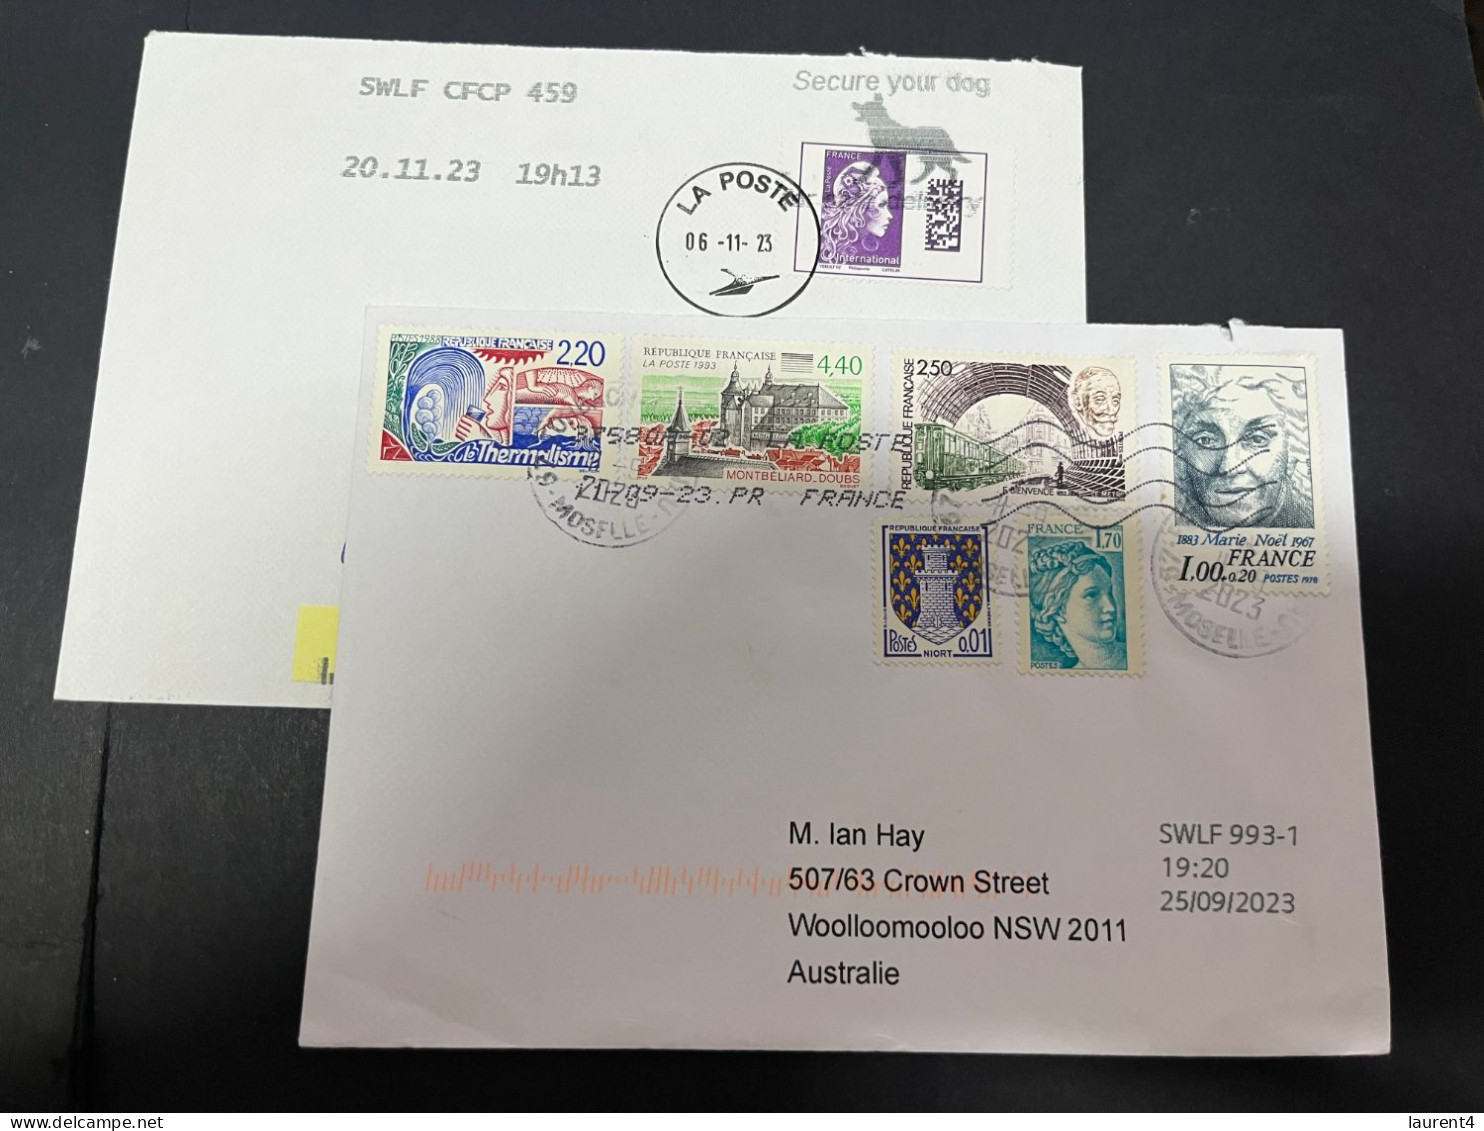 4-4-2024 (1 Z 3 A) France Letter Posted To Australia - 2 Covers - Covers & Documents